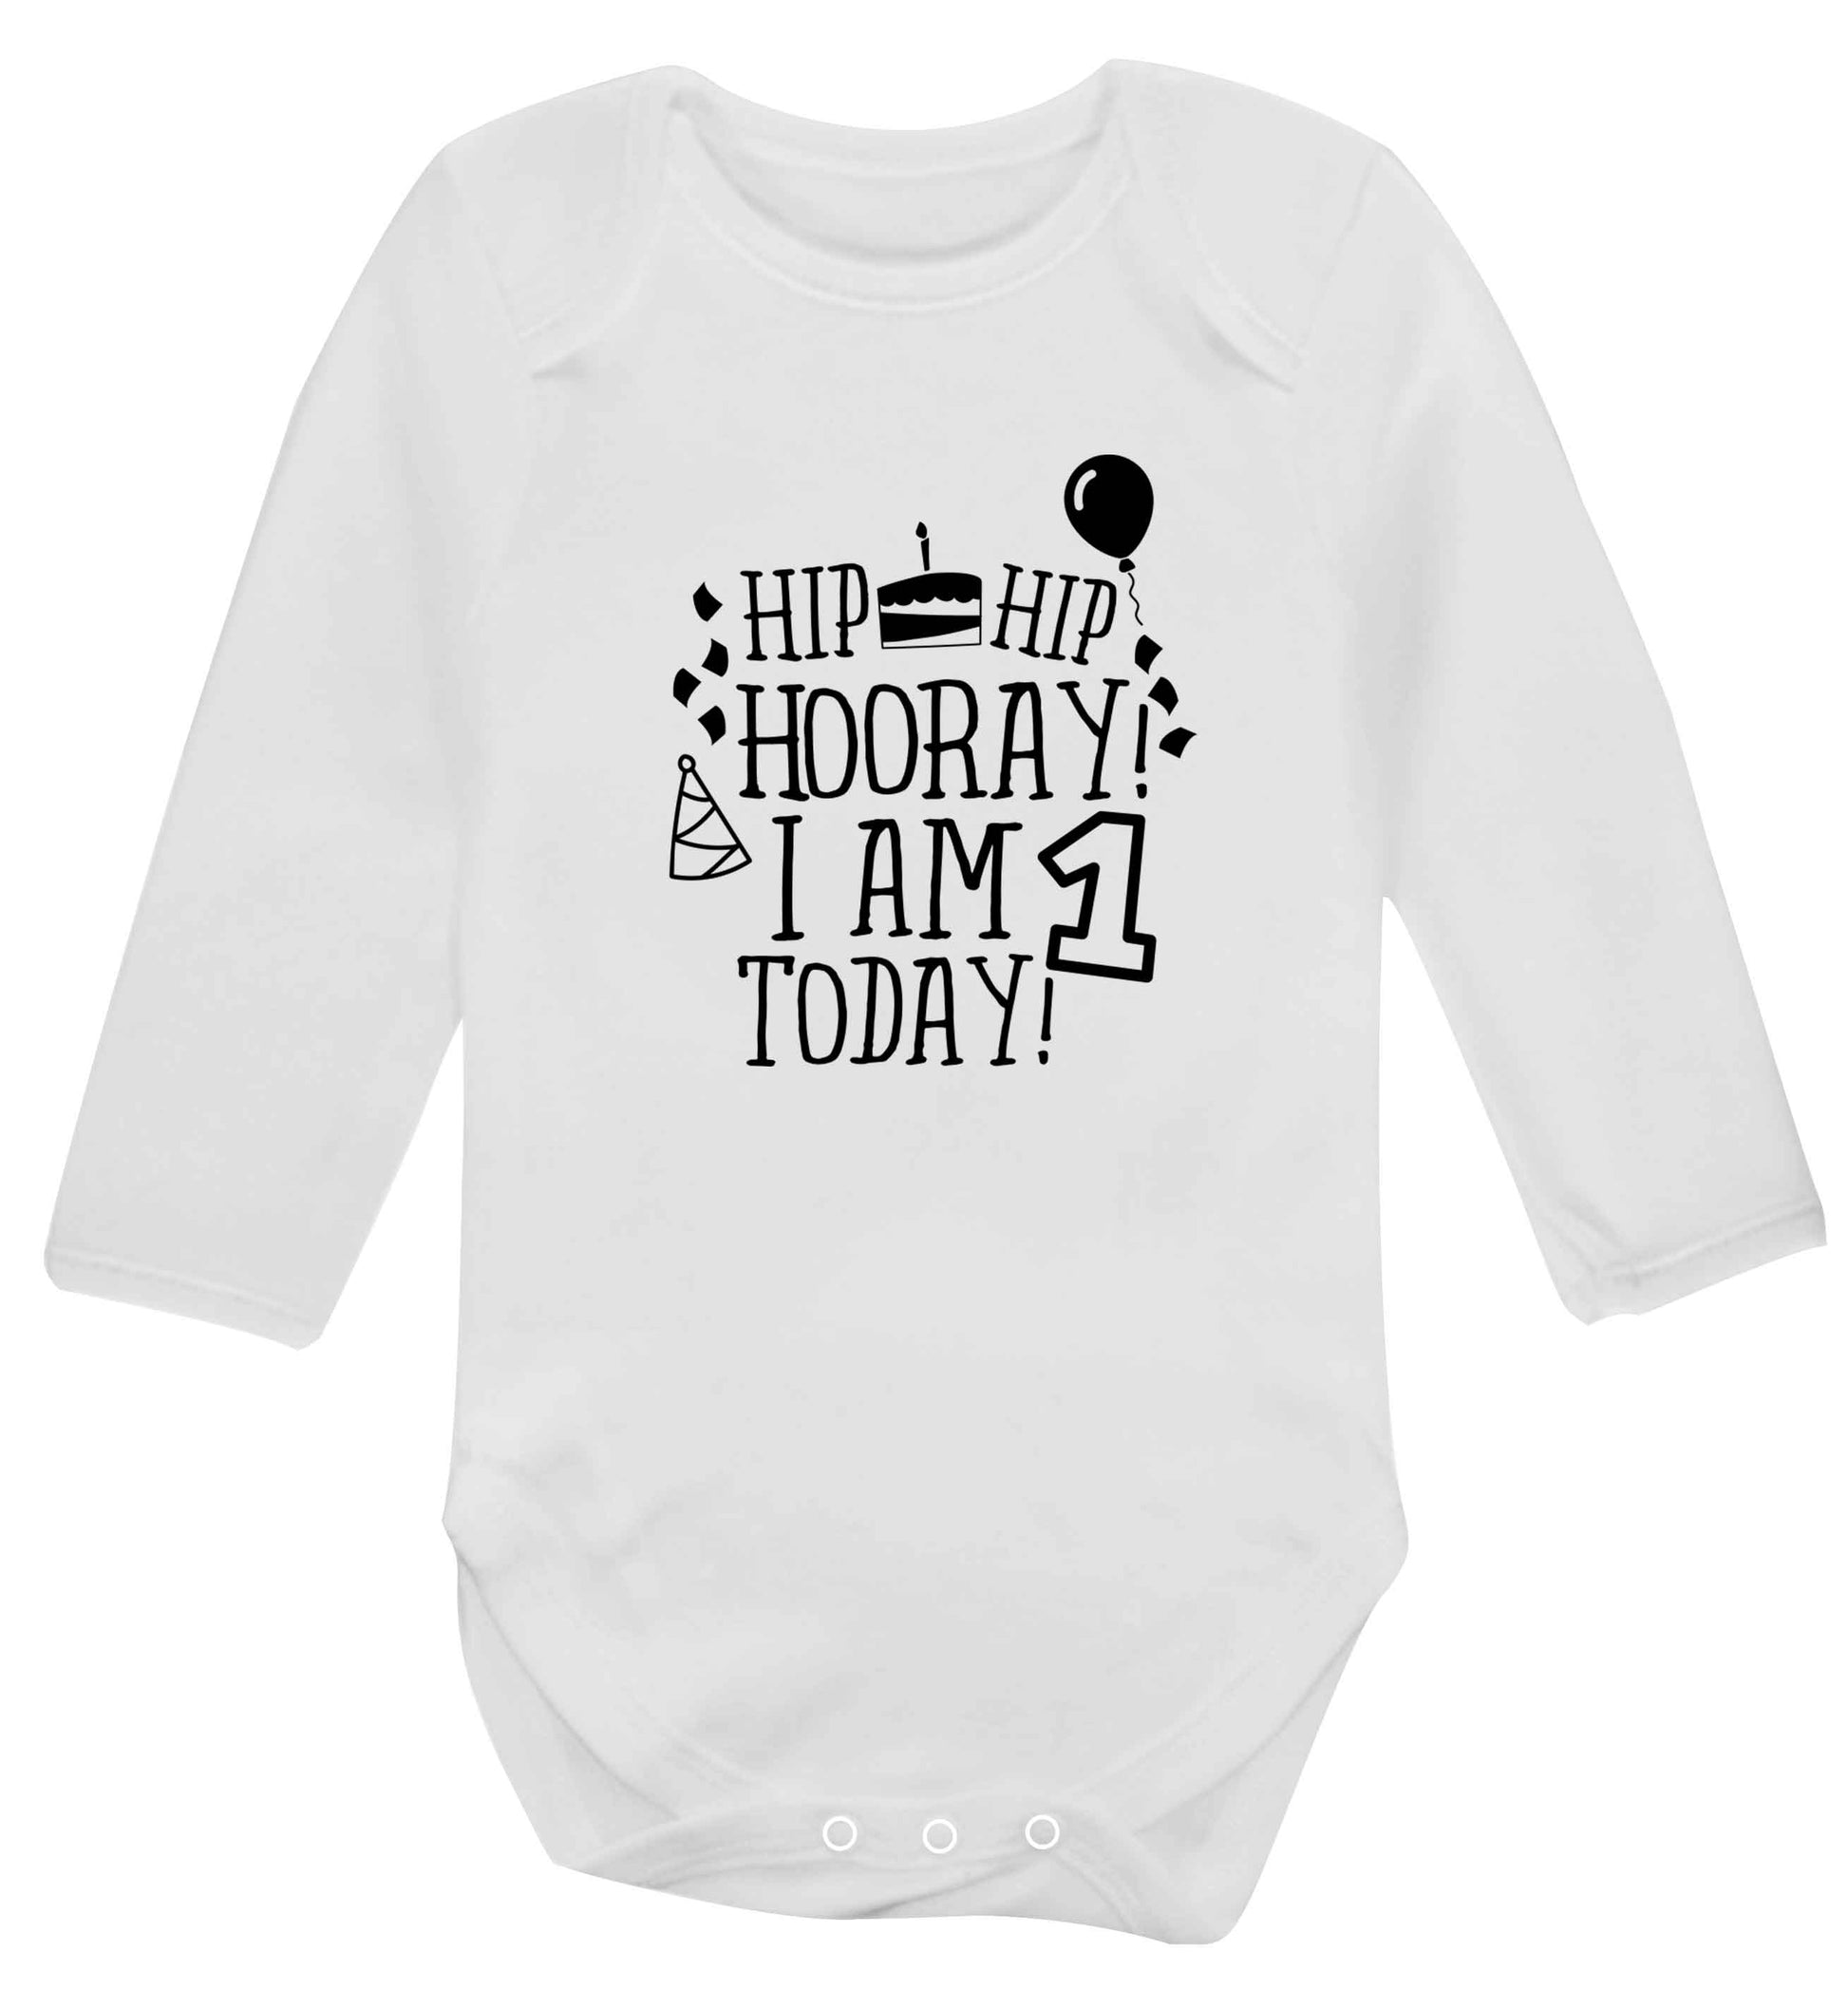 You're 2 Today baby vest long sleeved white 6-12 months